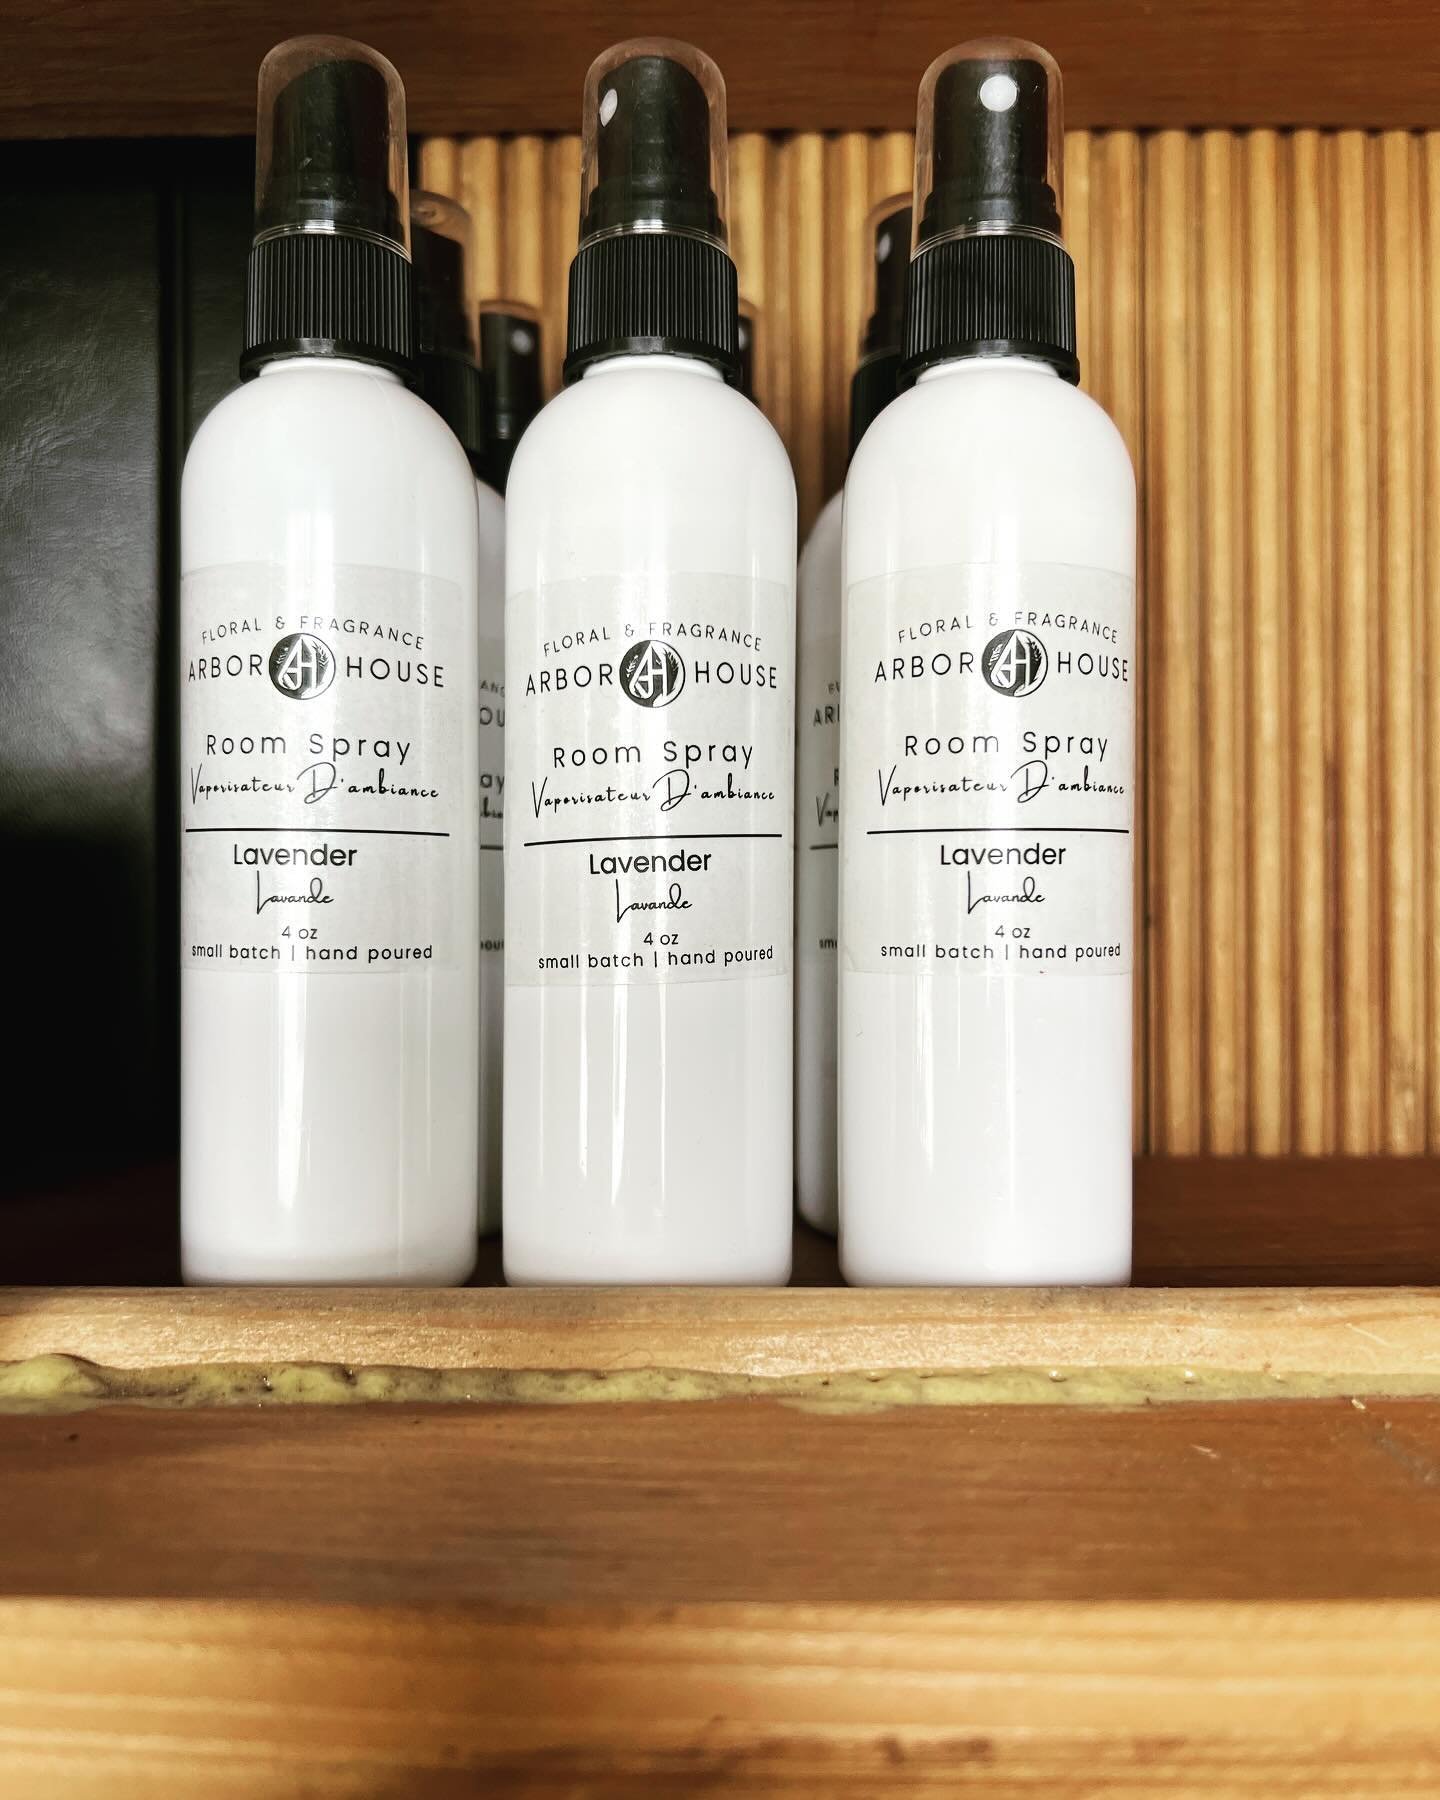 What to do when product runs low? Make More!! Restocked our 4oz room sprays today. Lavender, All That Jazz (lemongrass/jasmine), and our most popular Gardenia. #arborhousefloral #neworleansflorists #neworleansfragrance #roomsprays #floristnearme #met